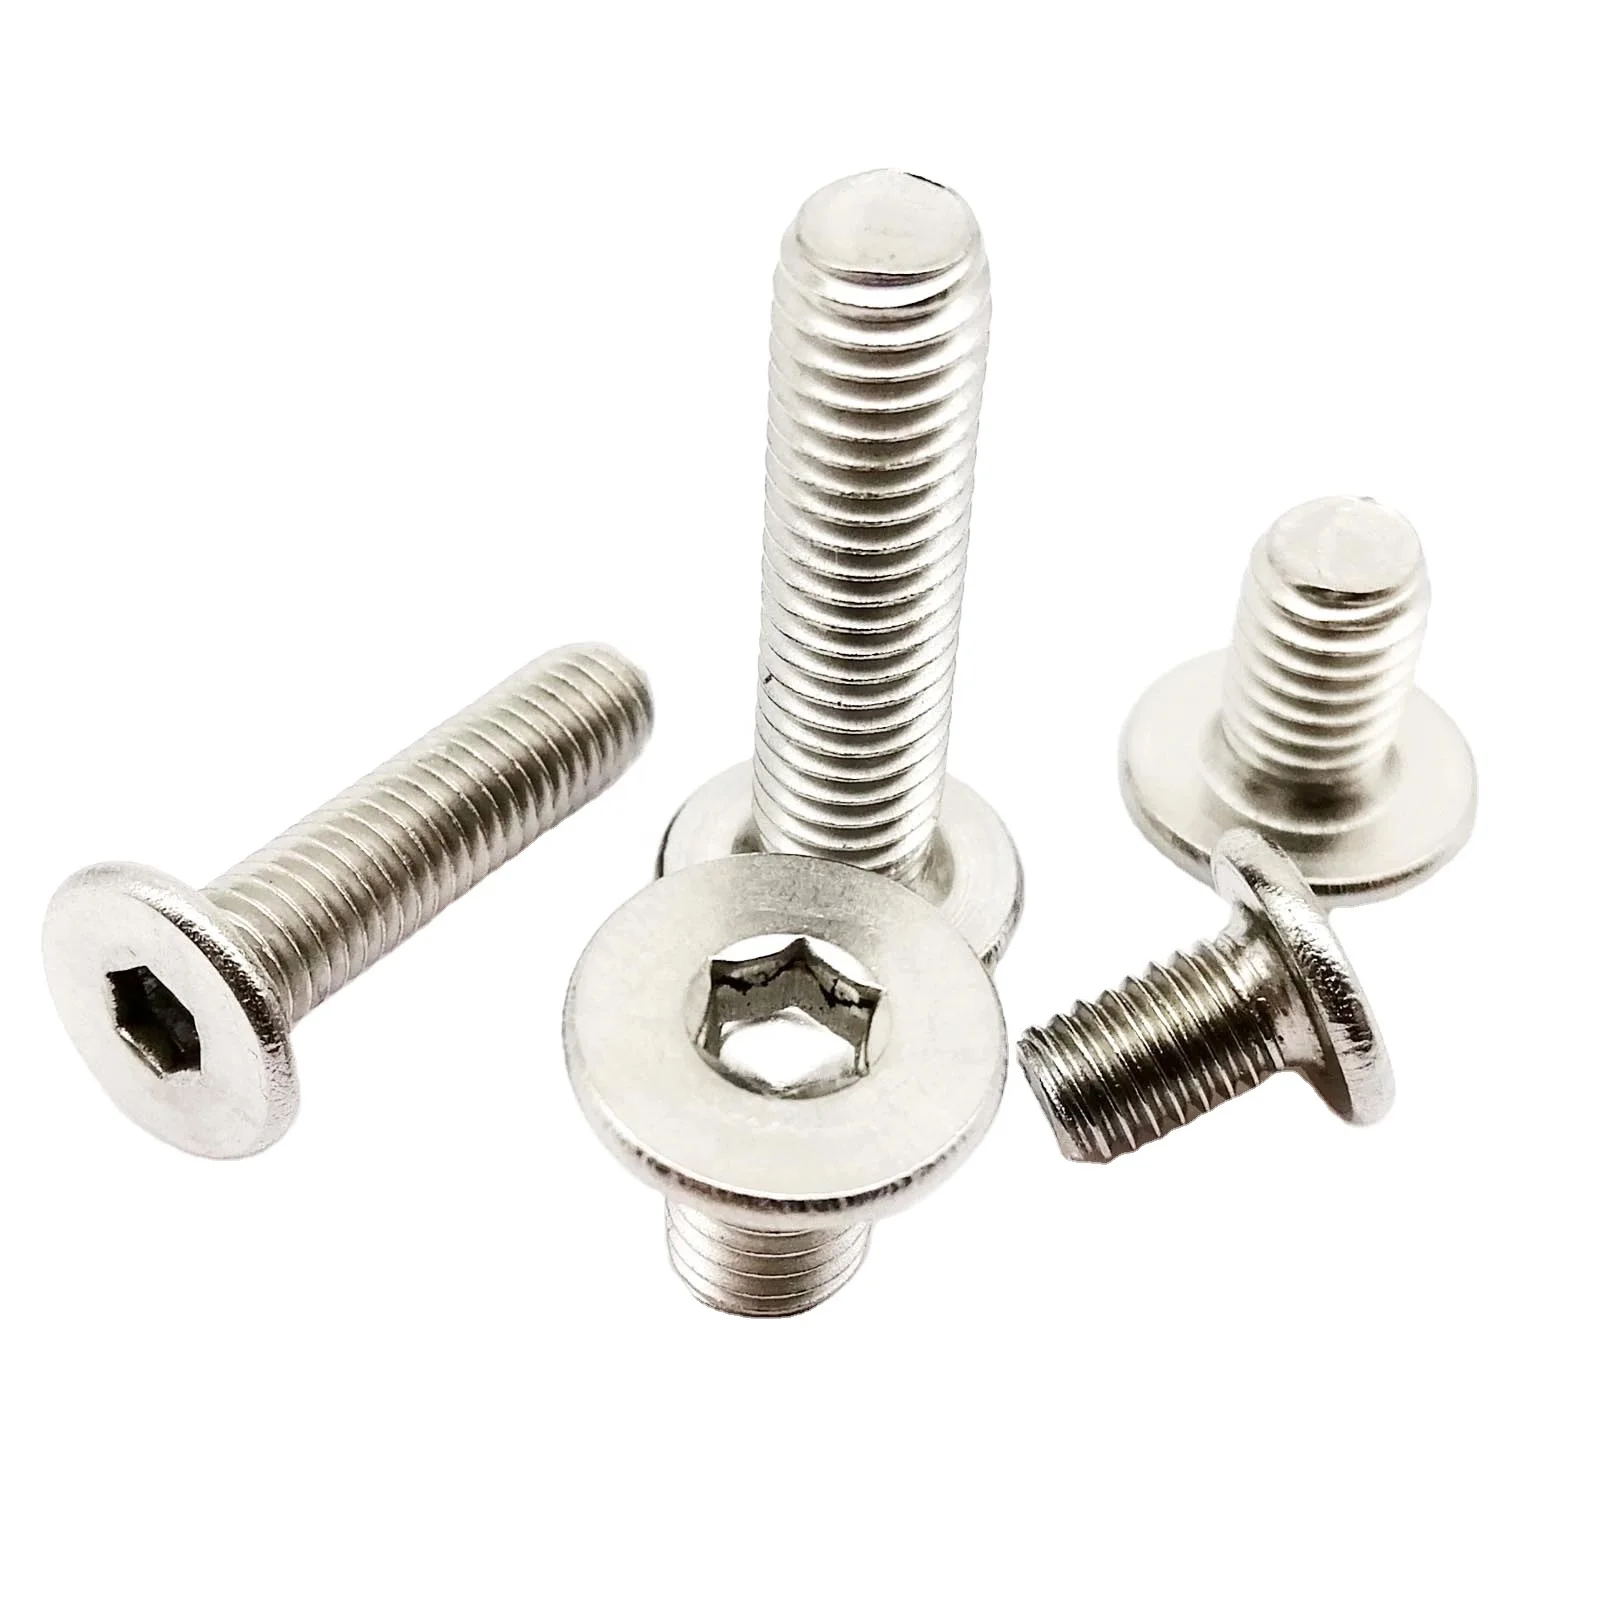 M4 M5 M6 Metric A2 Stainless Steel Fully Threaded Hex Bolts Nuts To Match 